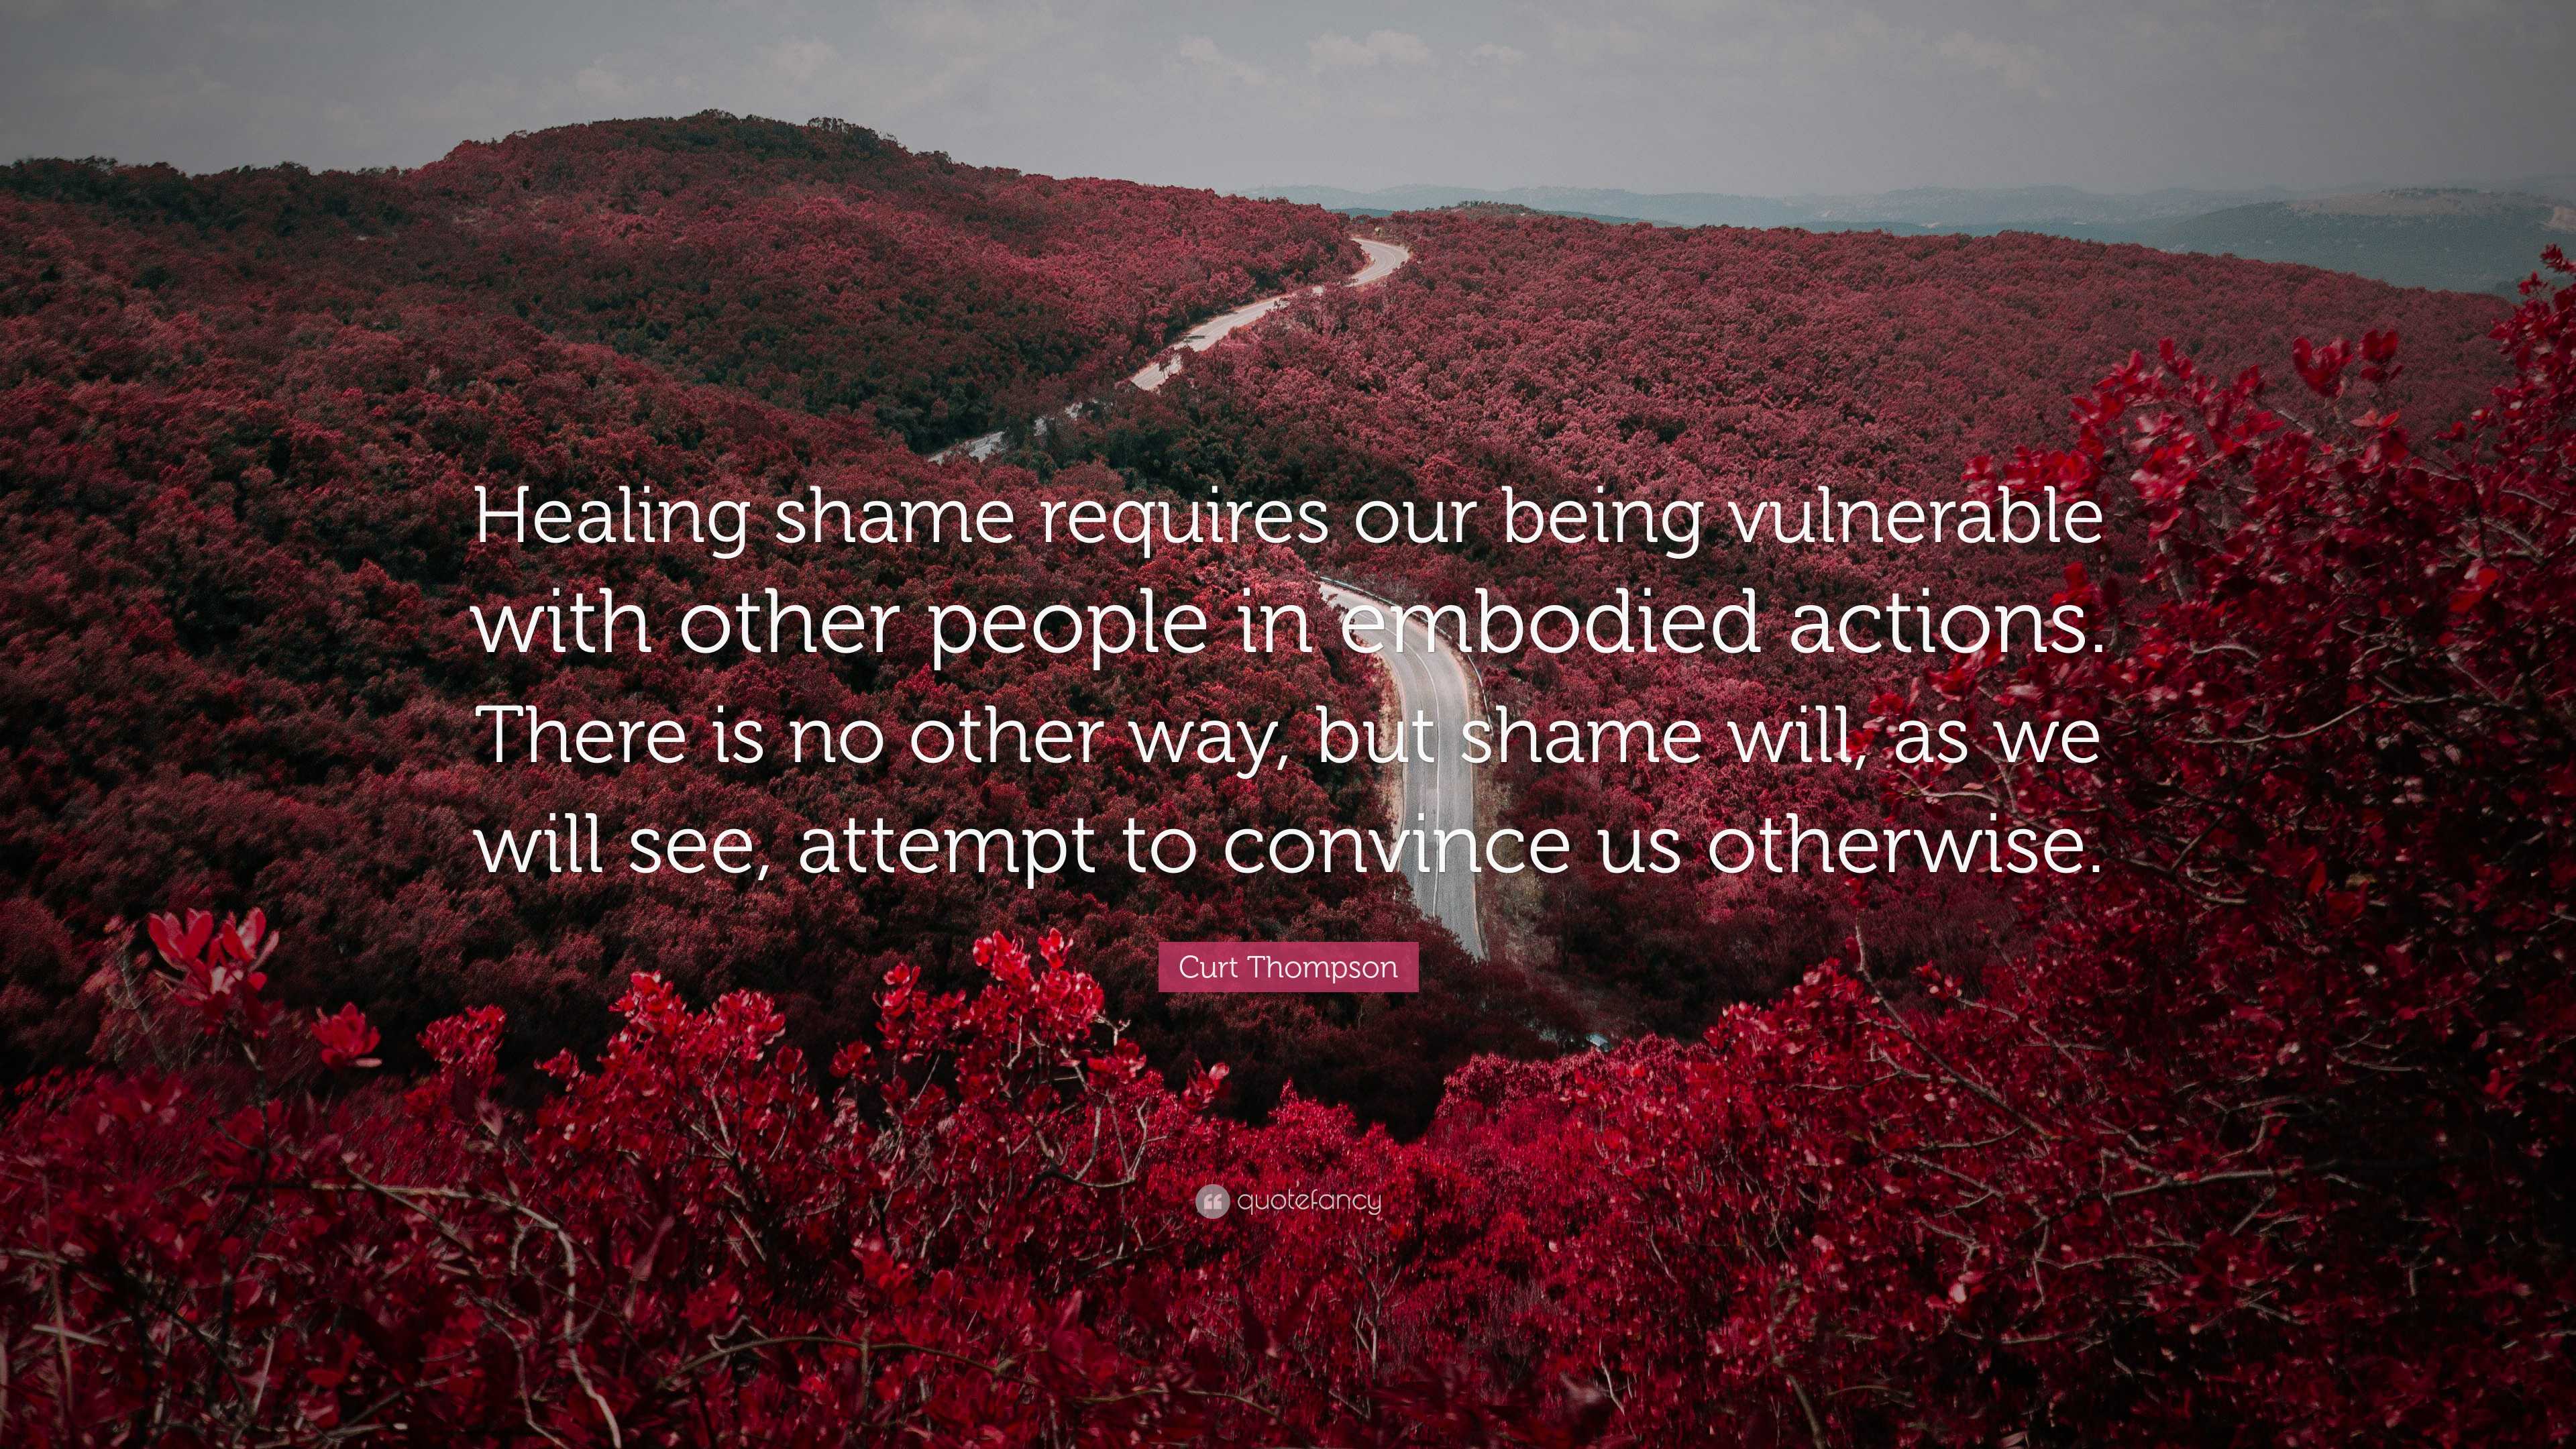 Curt Thompson Quote “Healing shame requires our being vulnerable with